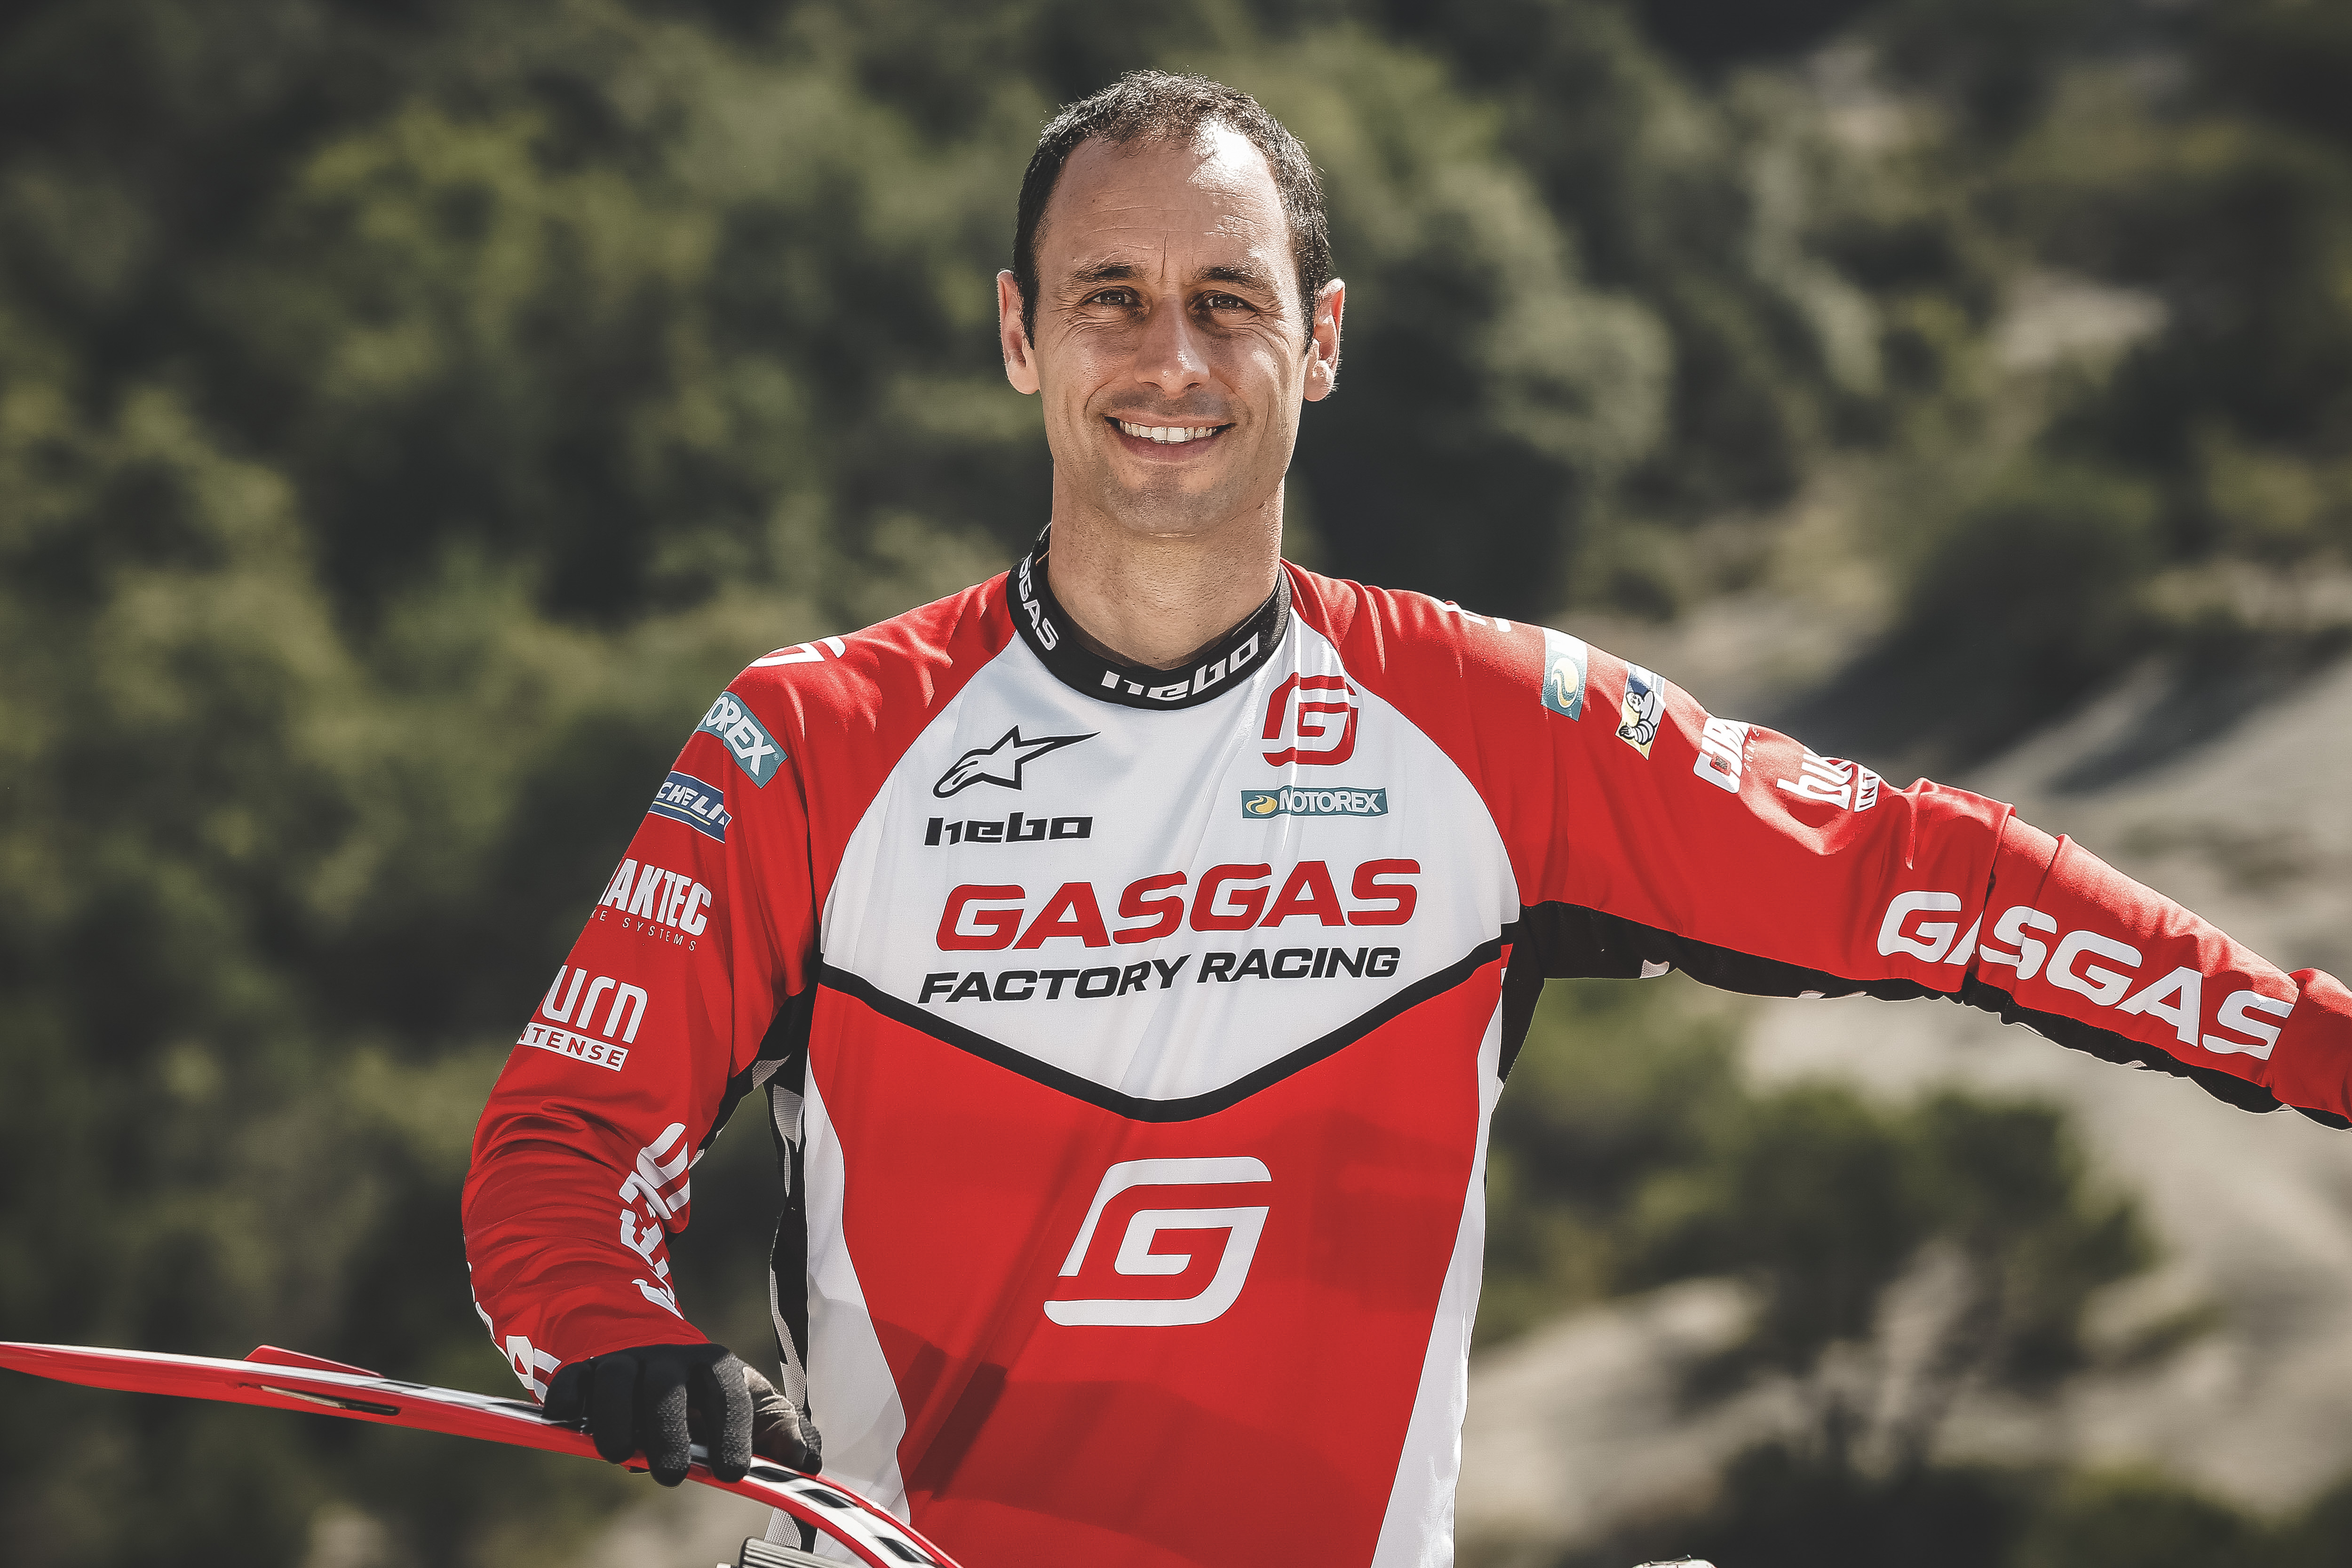 Gasgas Sign Albert Cabestany As Trialgp Team Manager